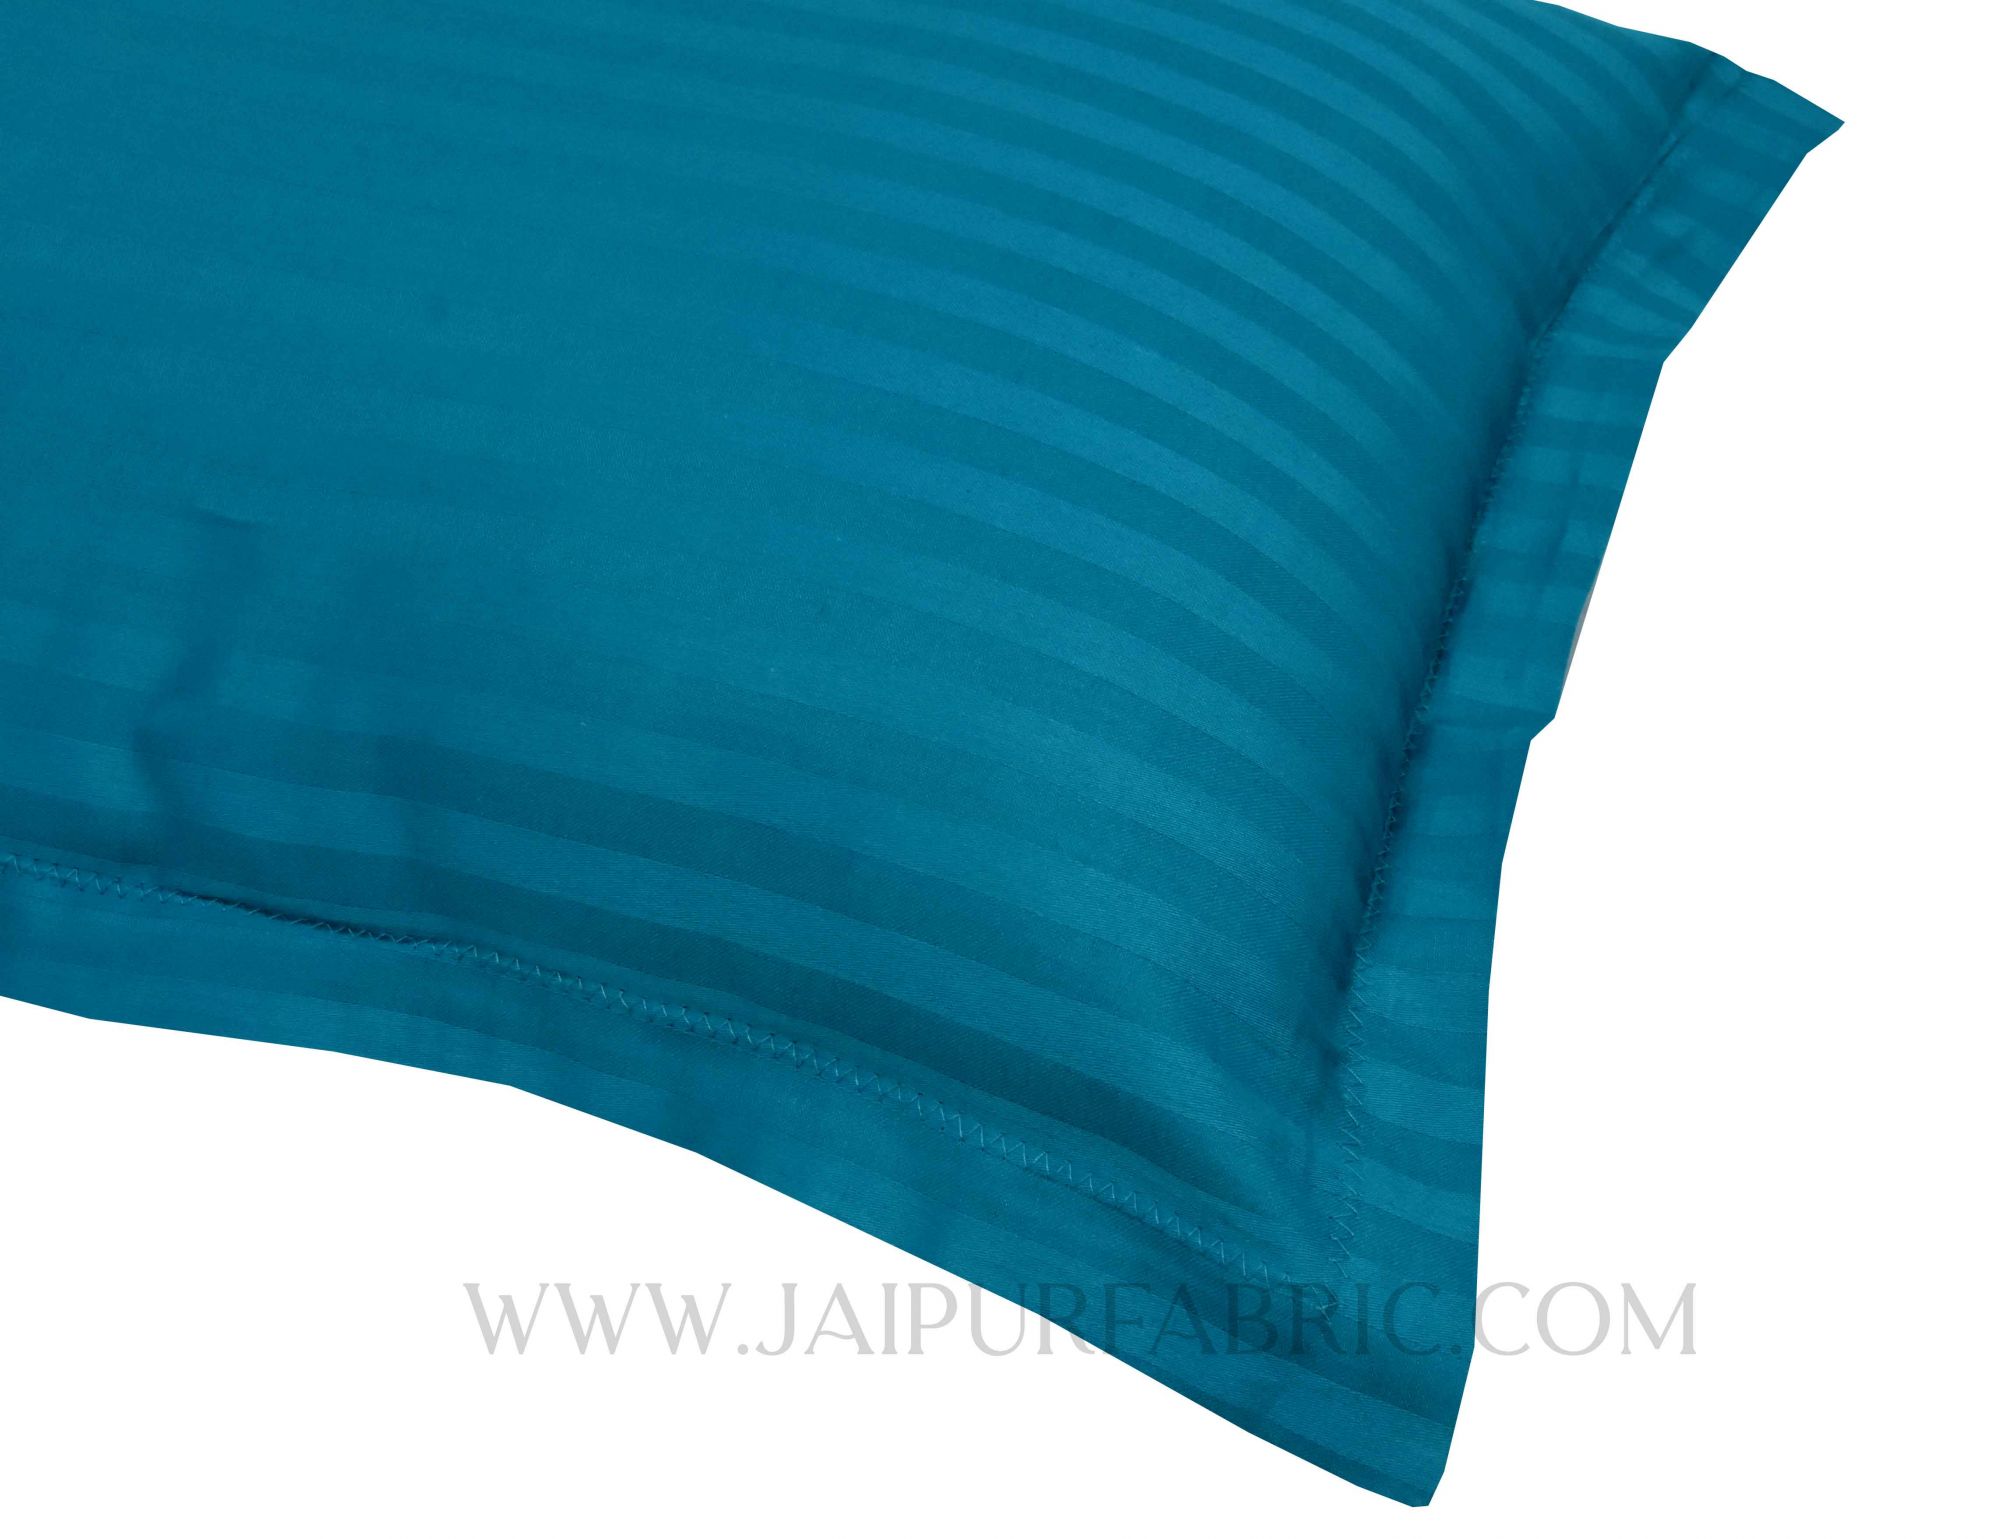 Turquoise Color Pillow Cover Pair